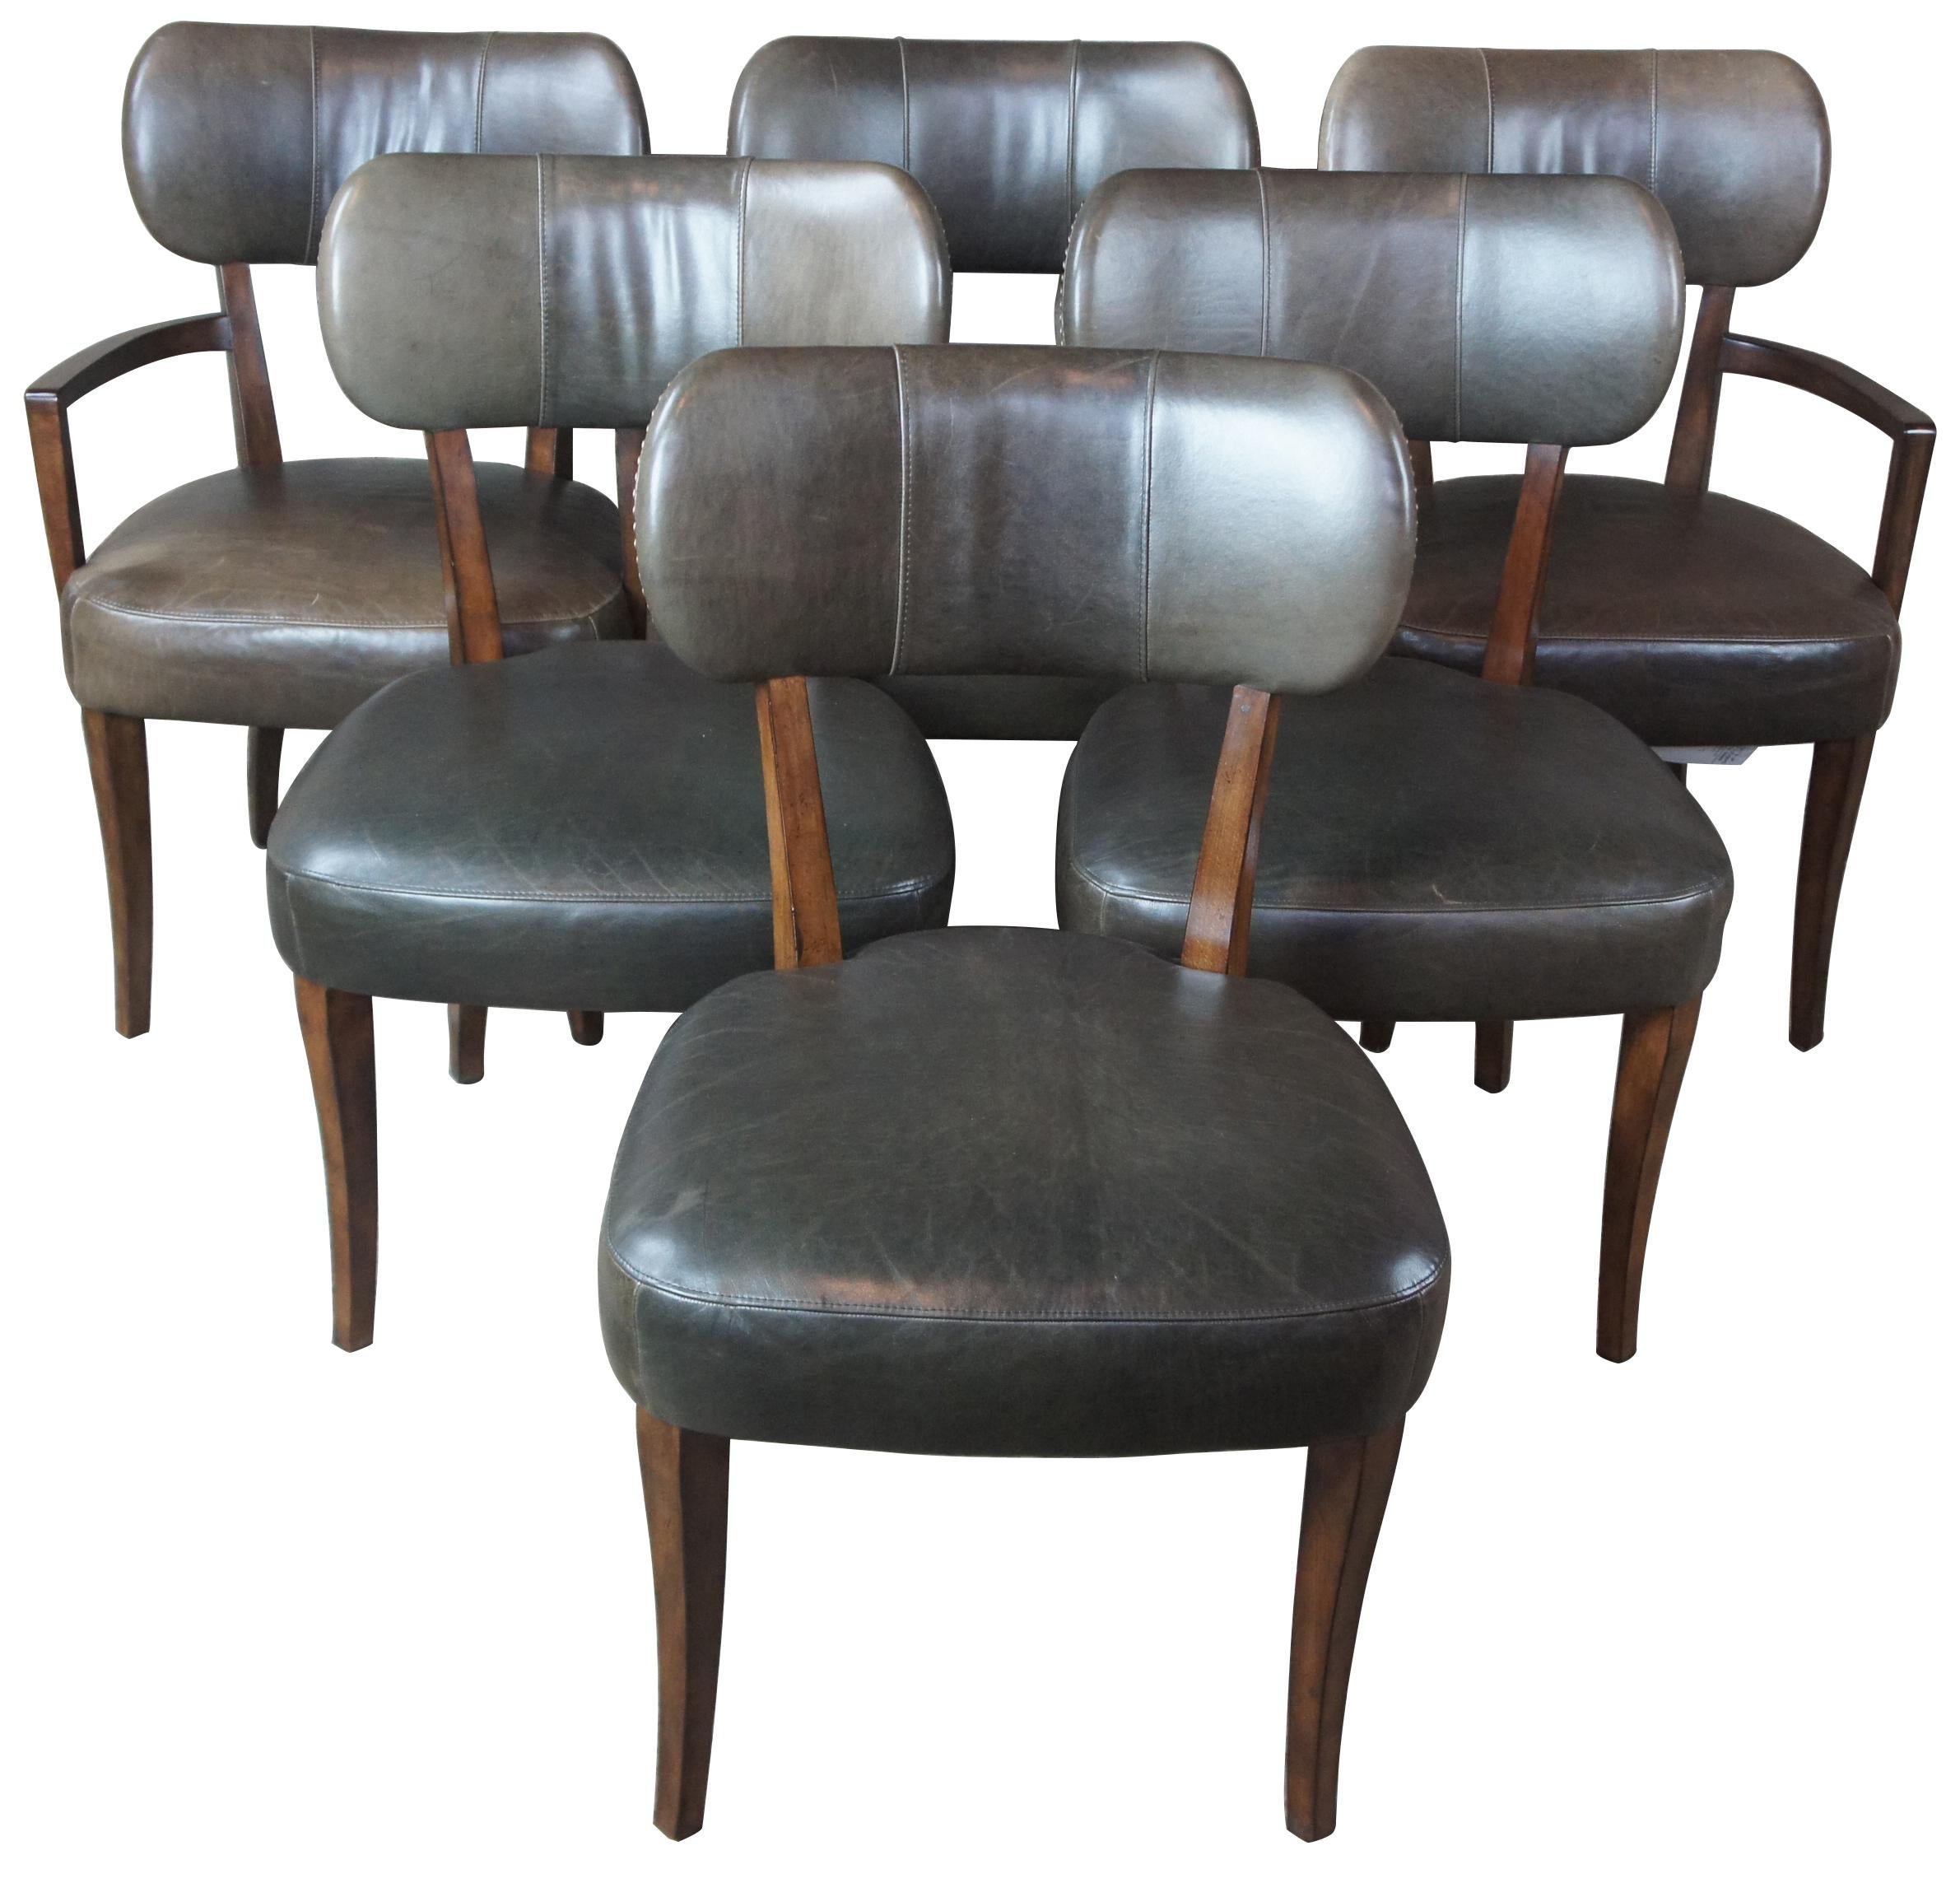 6 Traditional Henredon Acquisitions green leather and mahogany nailhead chairs

Henredon
Dining Chairs
Item#3400-27
3400-28

Henredon Acquisitions traditional leather dining chairs. Made from mahogany with clean lines, green leather cushions